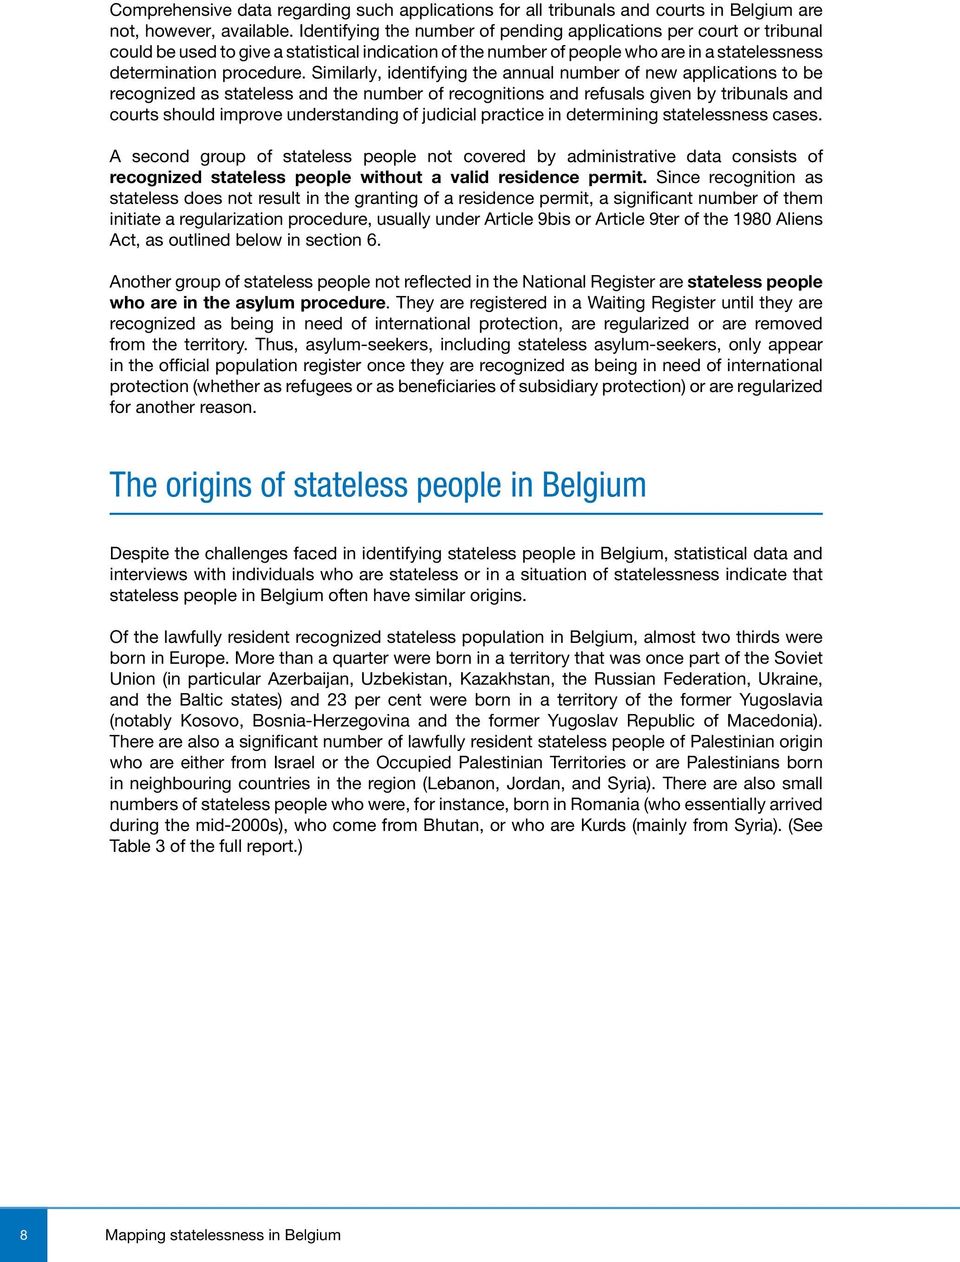 Similarly, identifying the annual number of new applications to be recognized as stateless and the number of recognitions and refusals given by tribunals and courts should improve understanding of